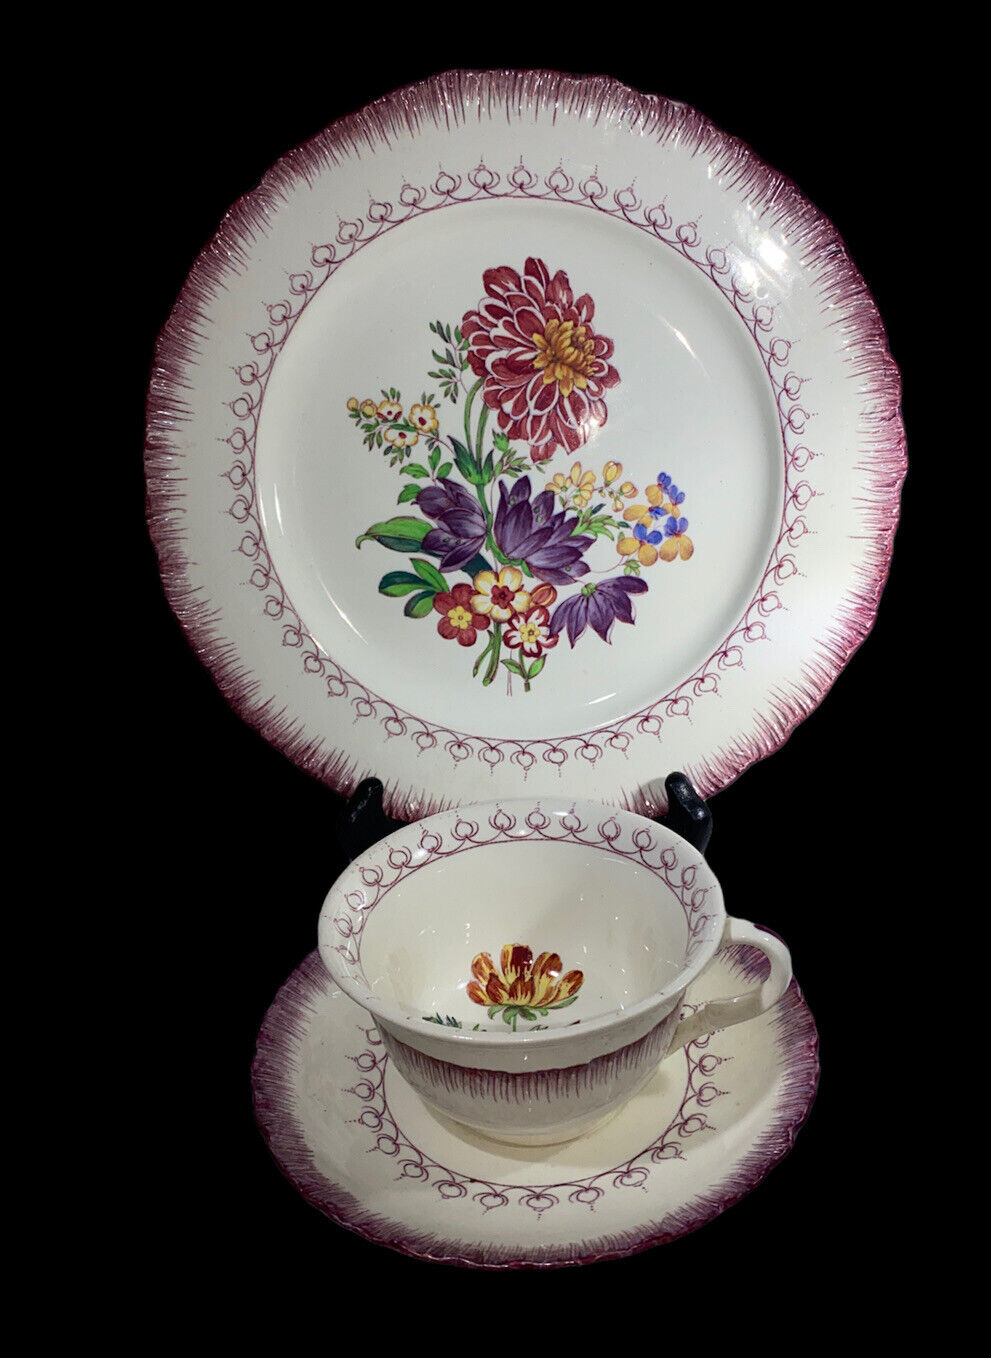 Wedgwood 3 Piece Set - Teacup, Saucer, Plate Windsor Pattern Collectible